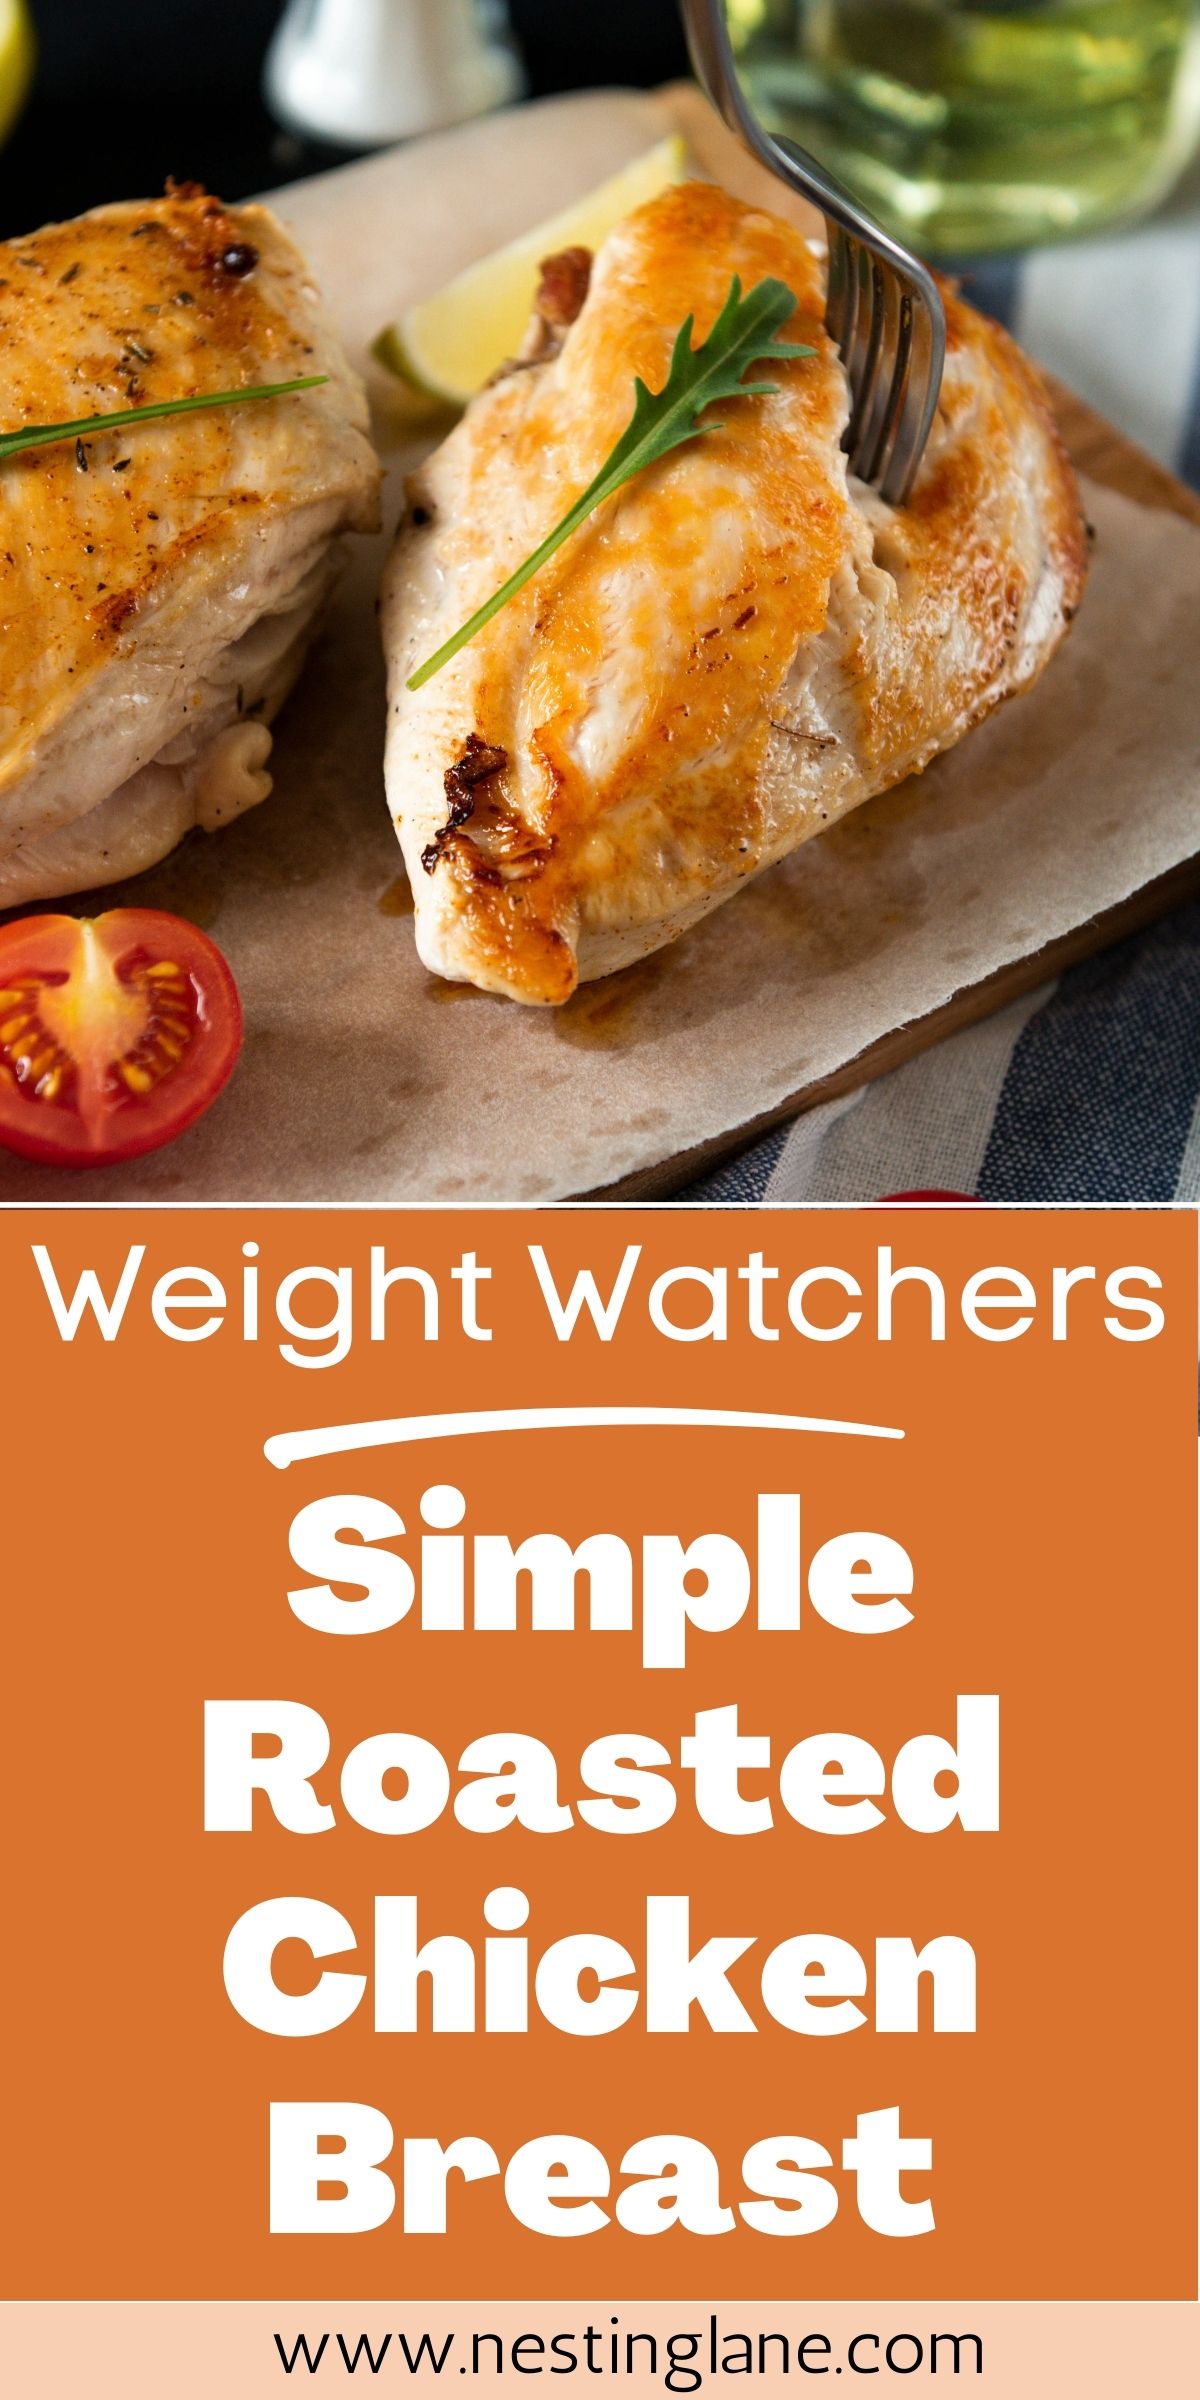 Graphic for Pinterest of Simple Roasted Chicken Breast (Weight Watchers) Recipe.